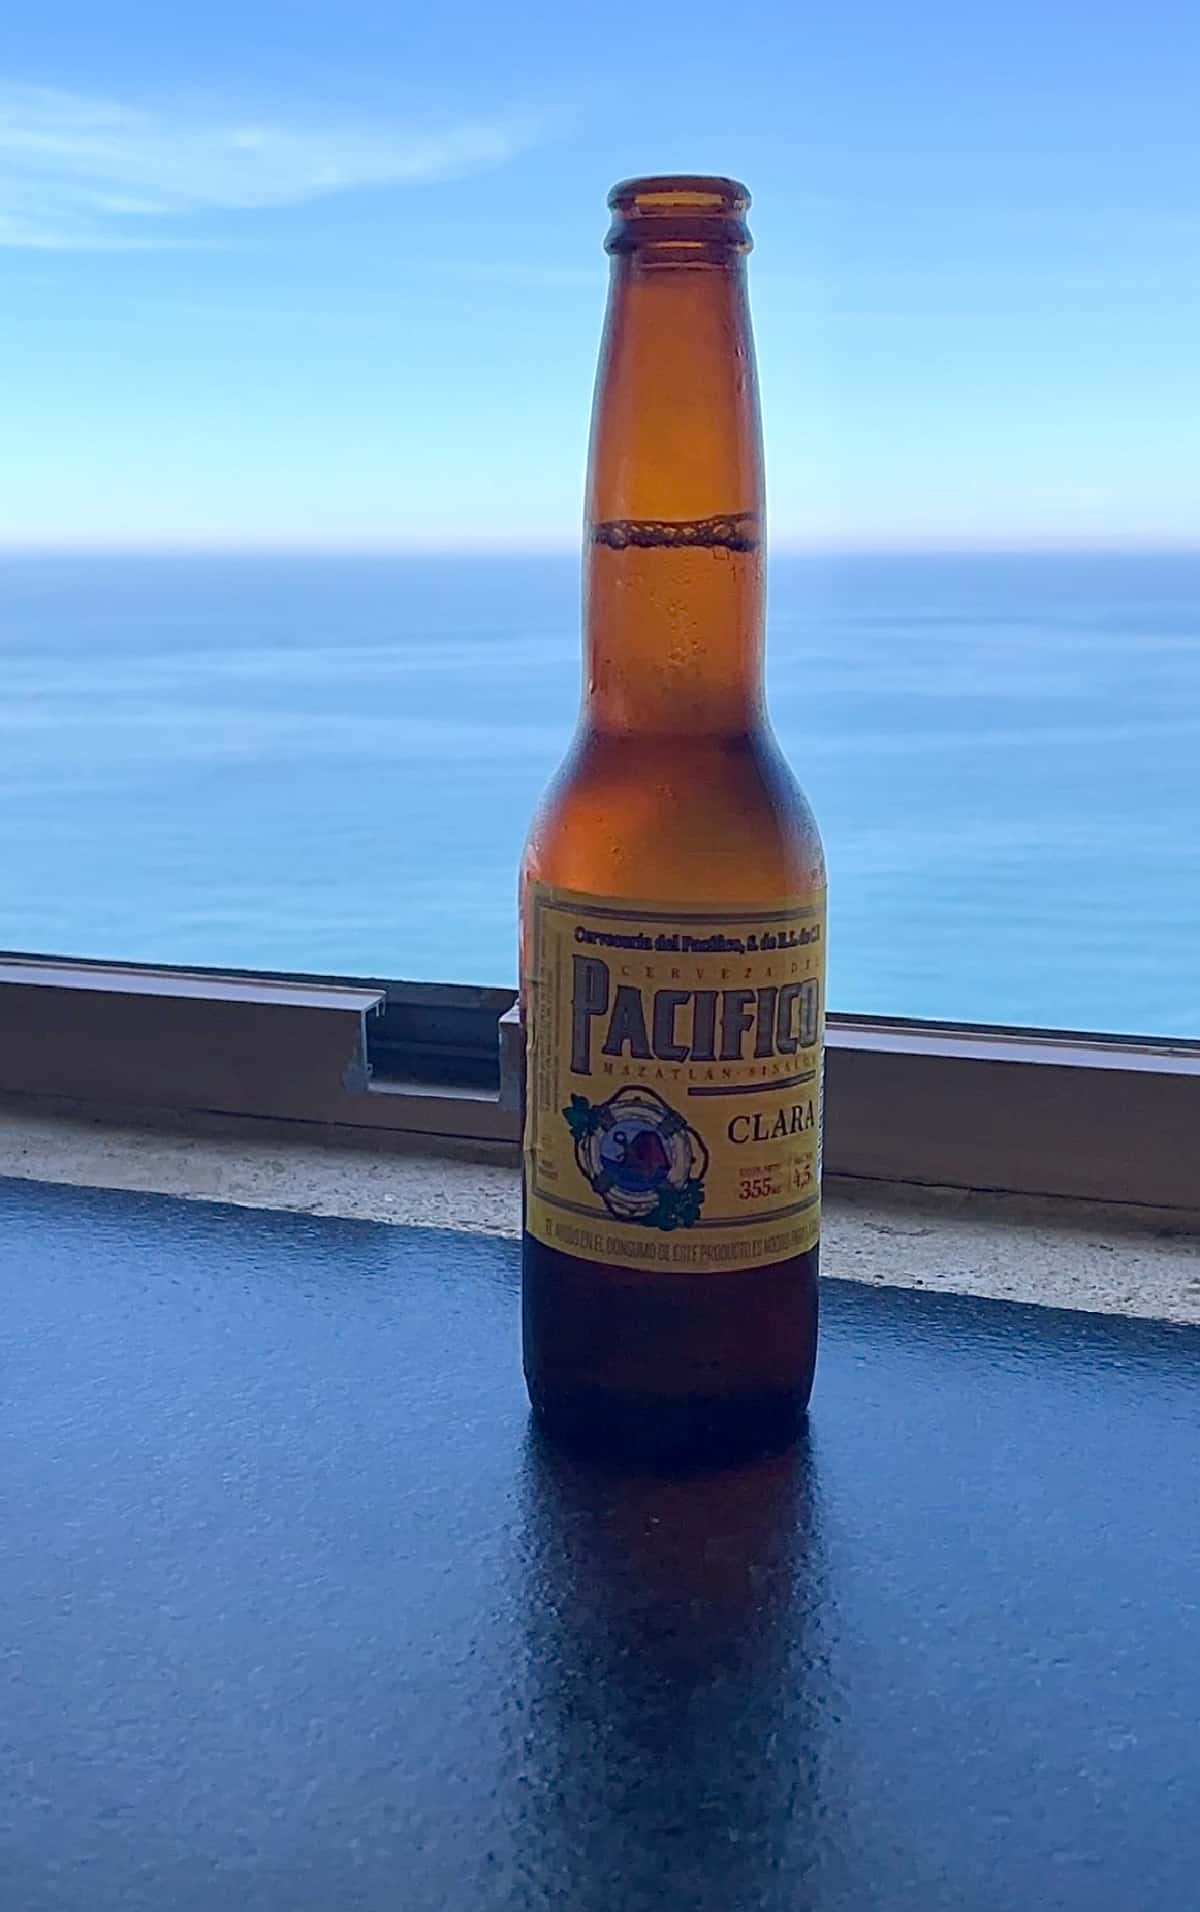 Pacifico beer on ledge of window.